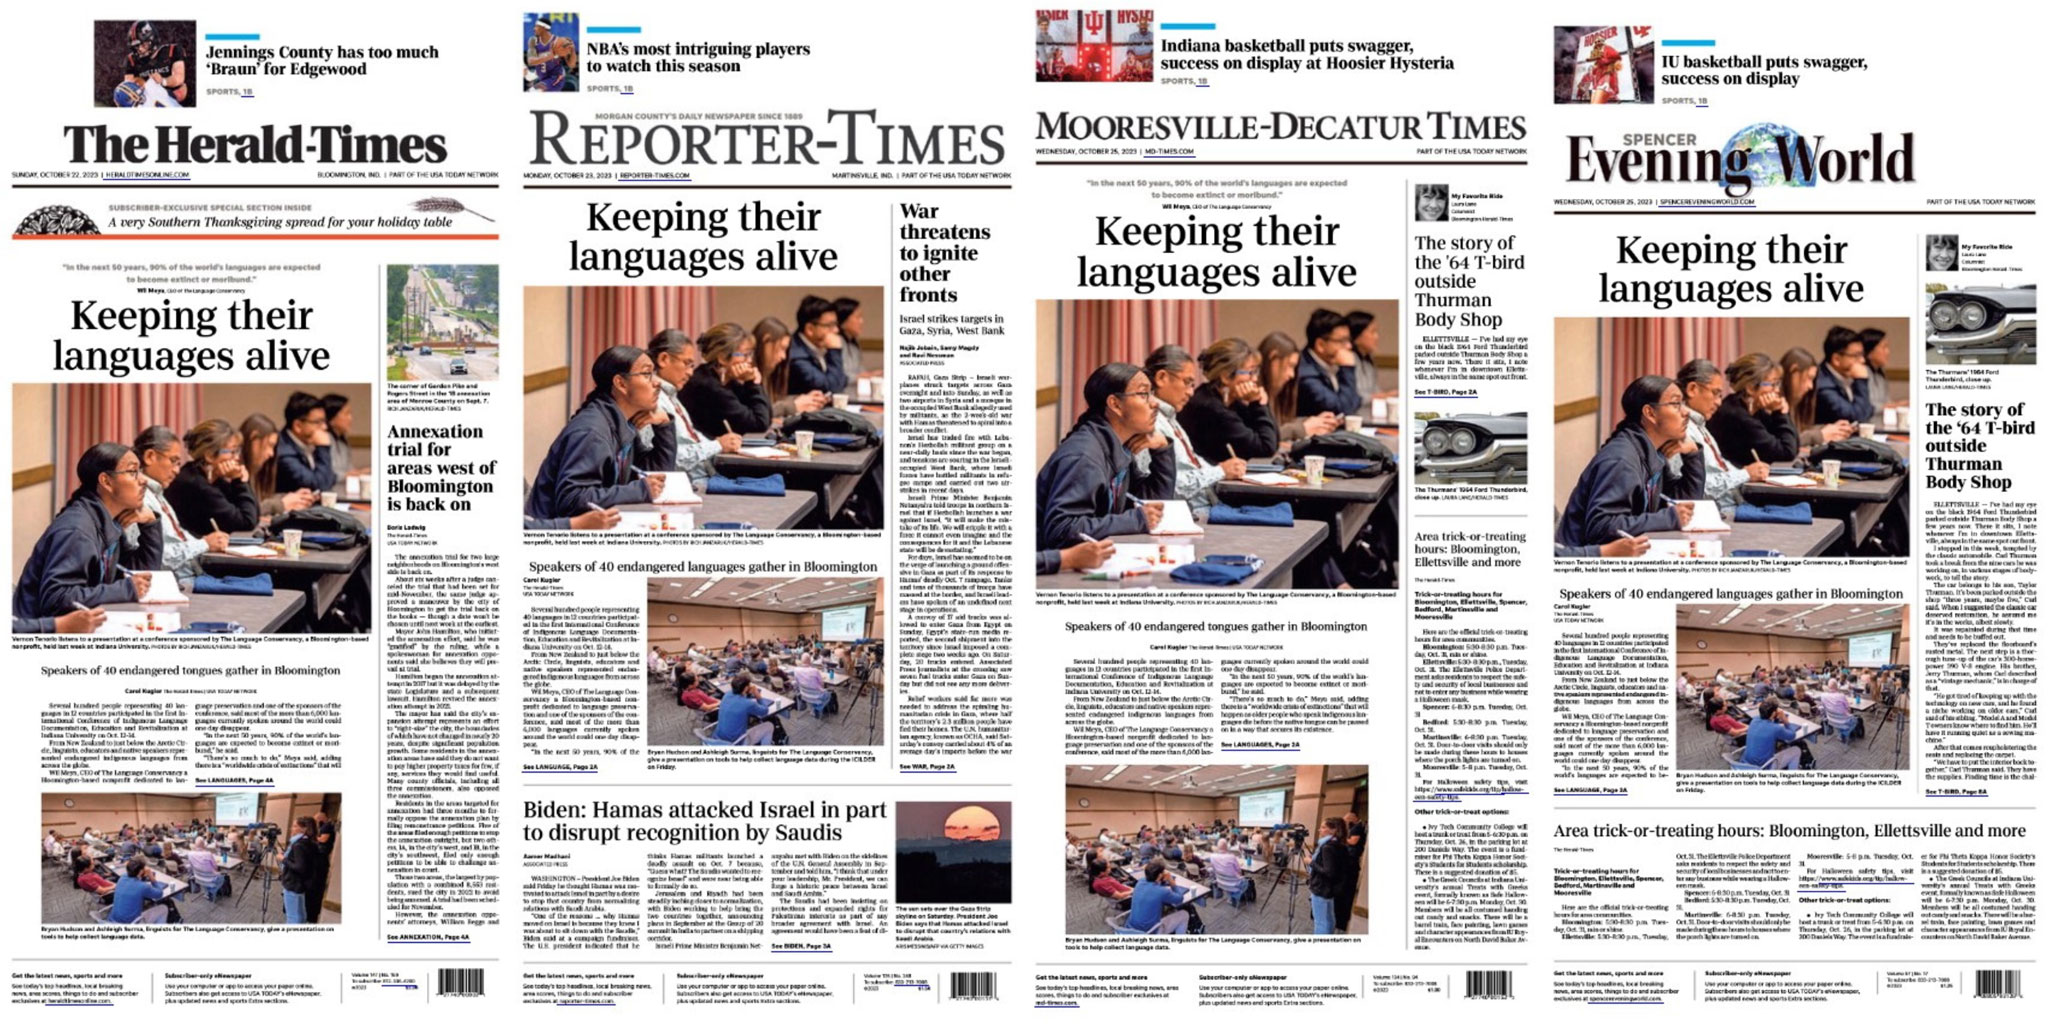 The Herald-Times in Monroe County, Mooresville-Decatur Times, Spencer Evening World and Martinsville Reporter-Times using the same stories across multiple front pages. Martinsville Reporter-Times ran this story on Monday, Oct. 23, both Mooresville-Decatur and Spencer ran this story on Wednesday, Oct. 25, and Herald-Times ran this story on Friday, Oct. 27.